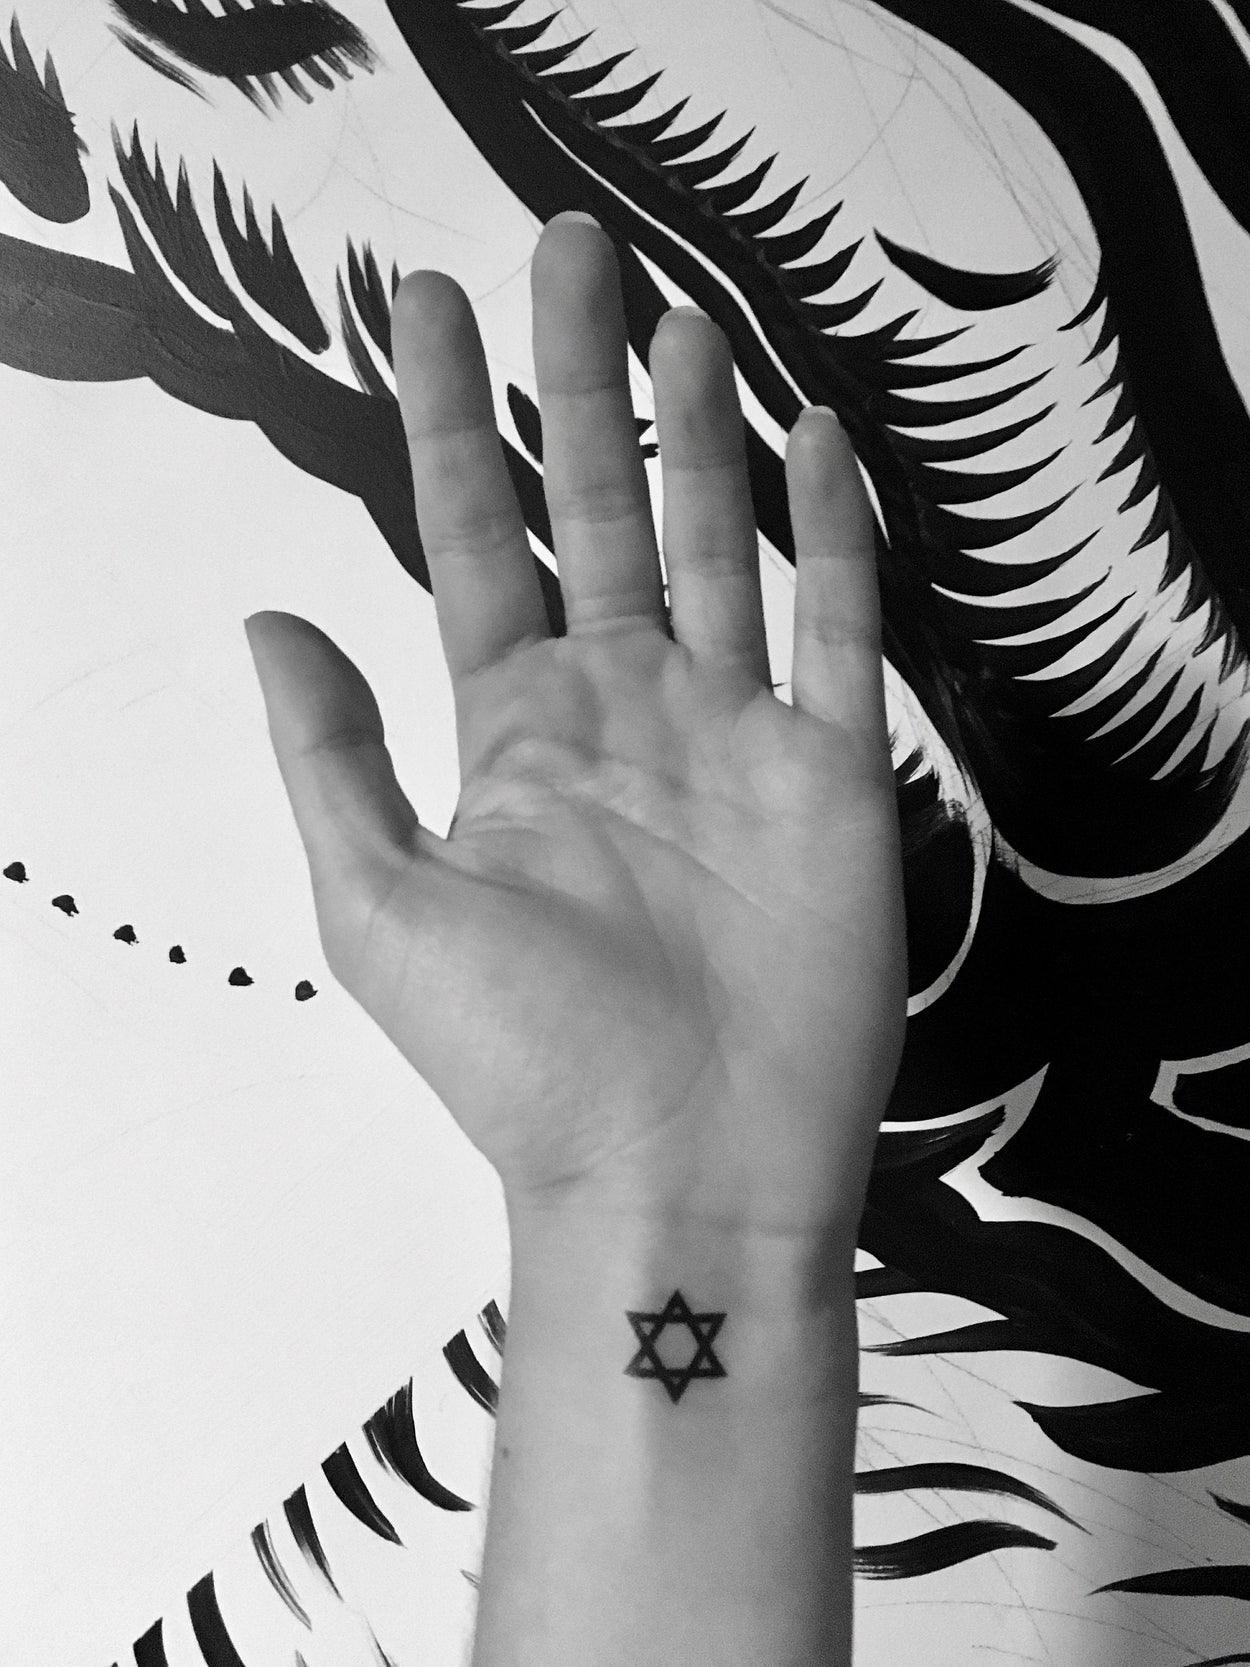 Religious Symbols Tattoos | Cross, Star of David, Crescent and Yin Yang pictograms in  lack